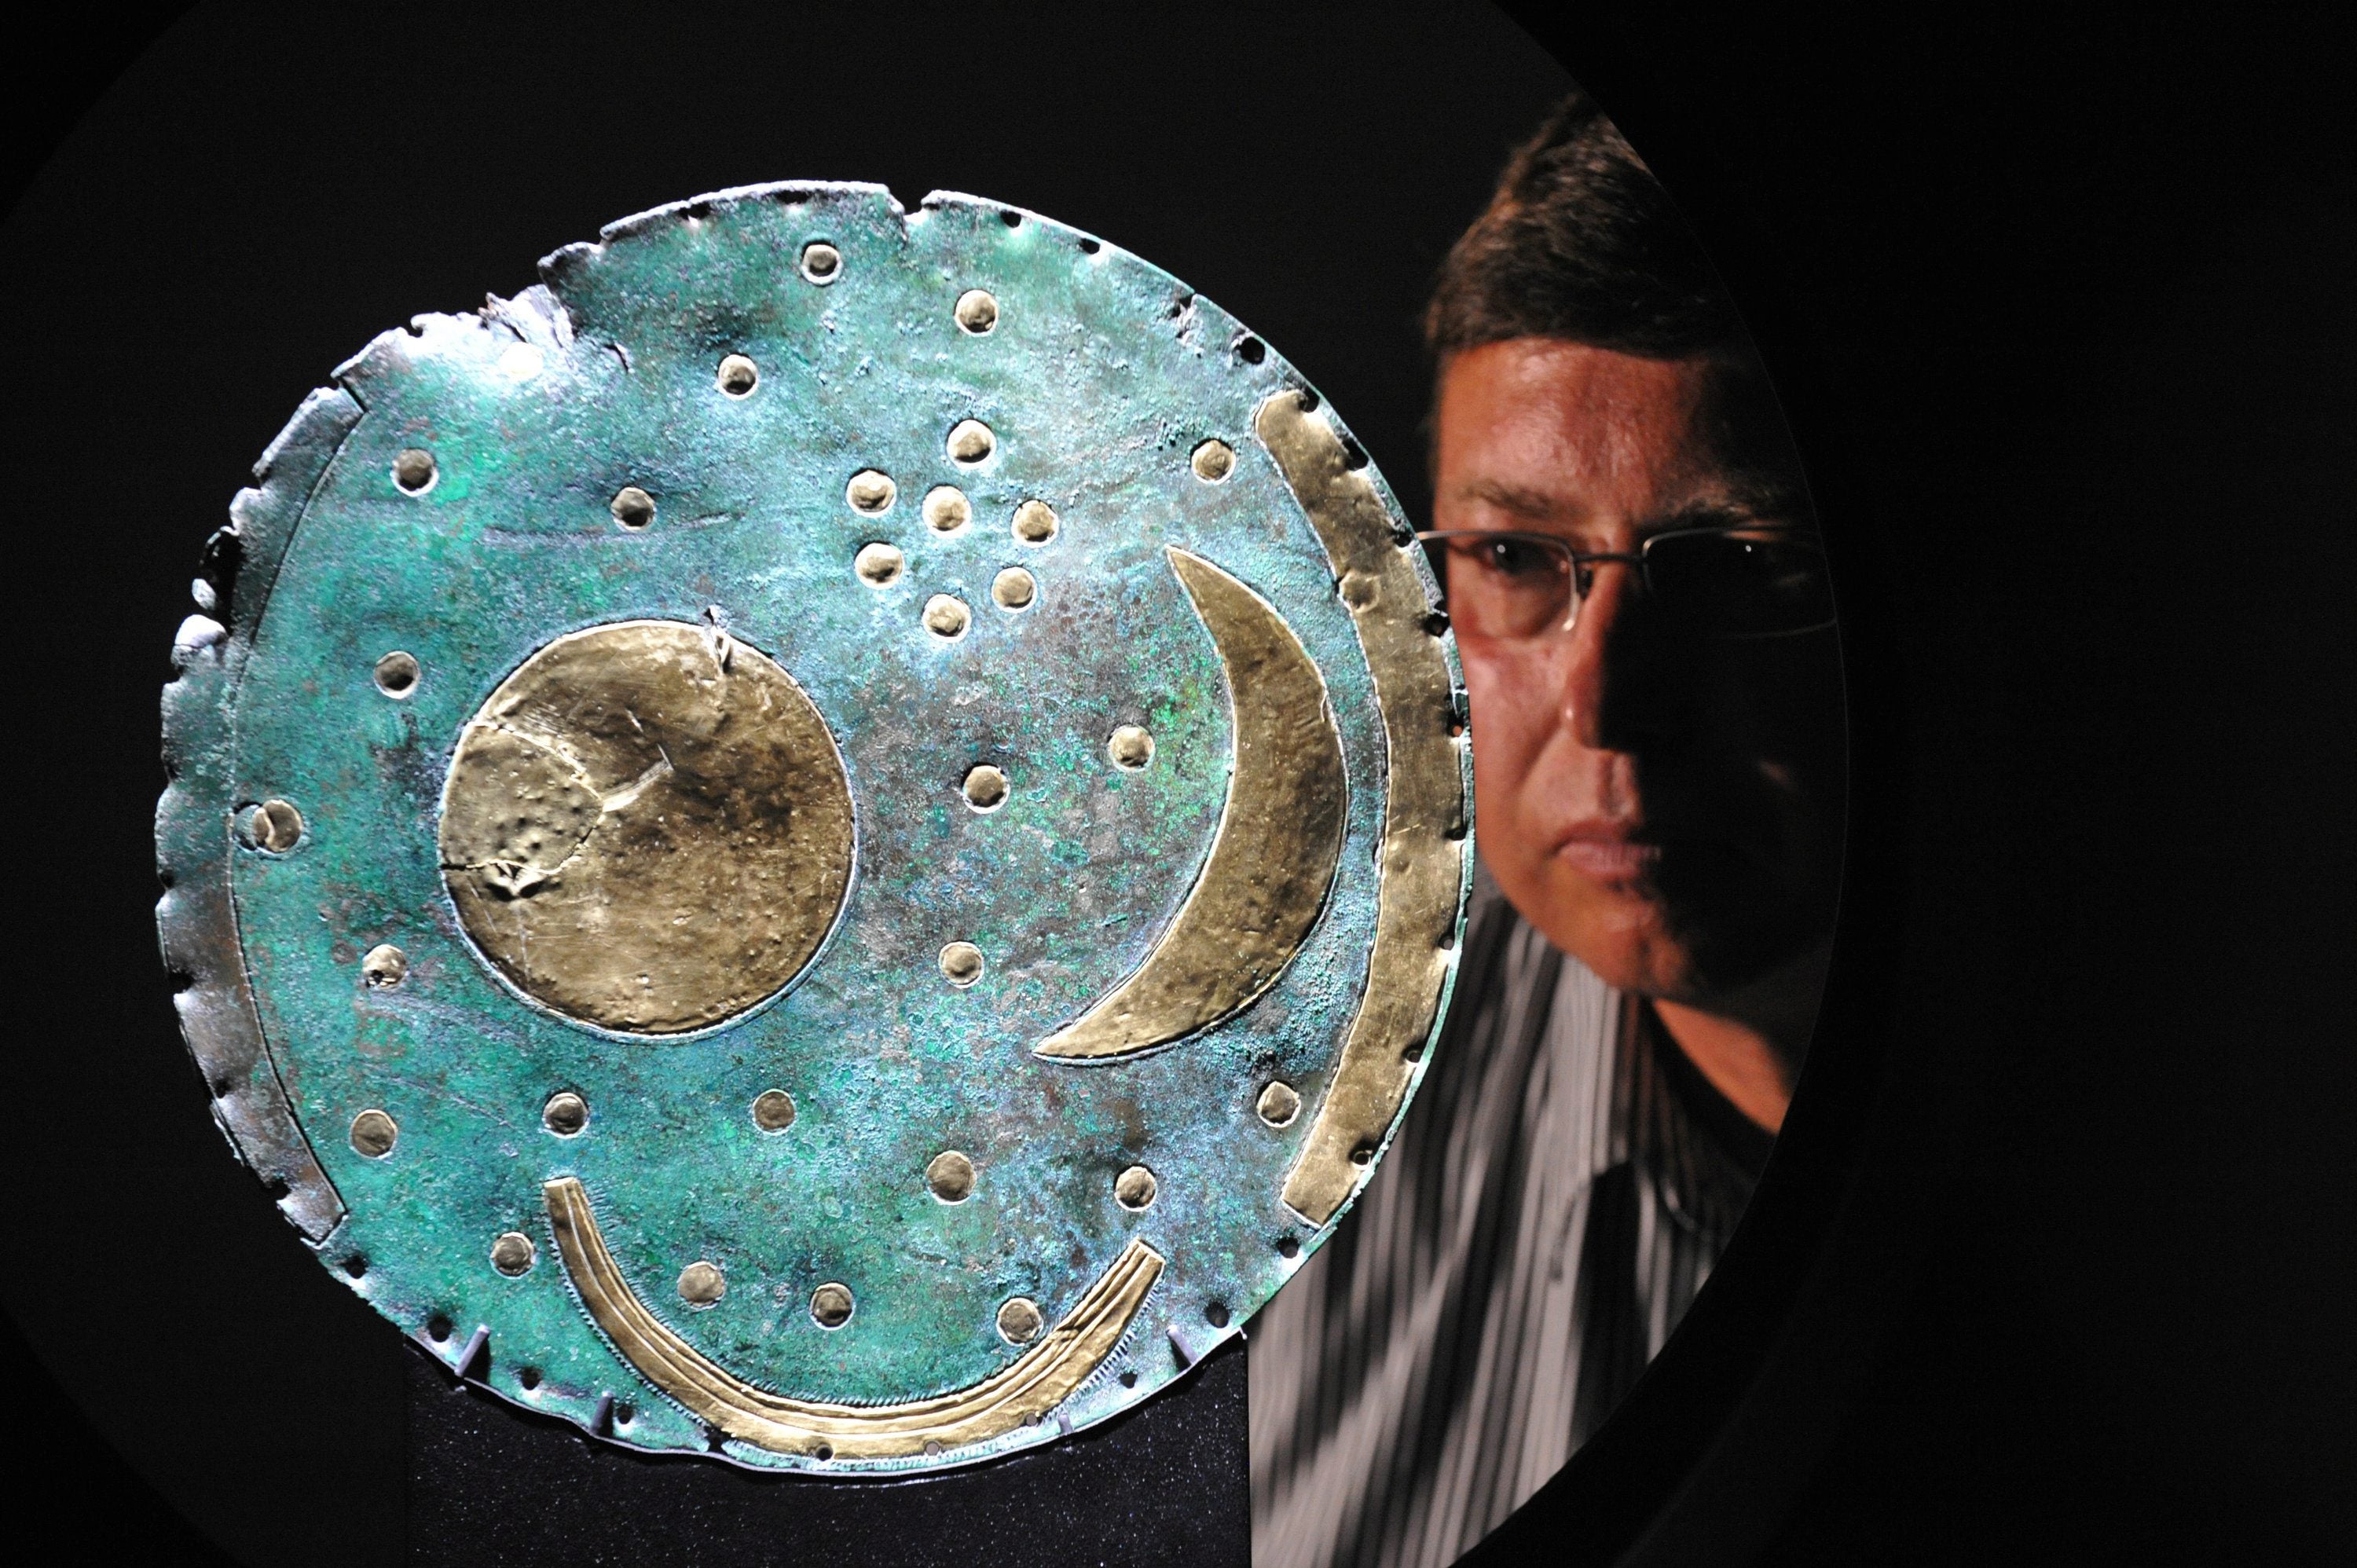 The 3,600 year old Nebra Sky Disc is thought to be the world’s oldest surviving map of the stars